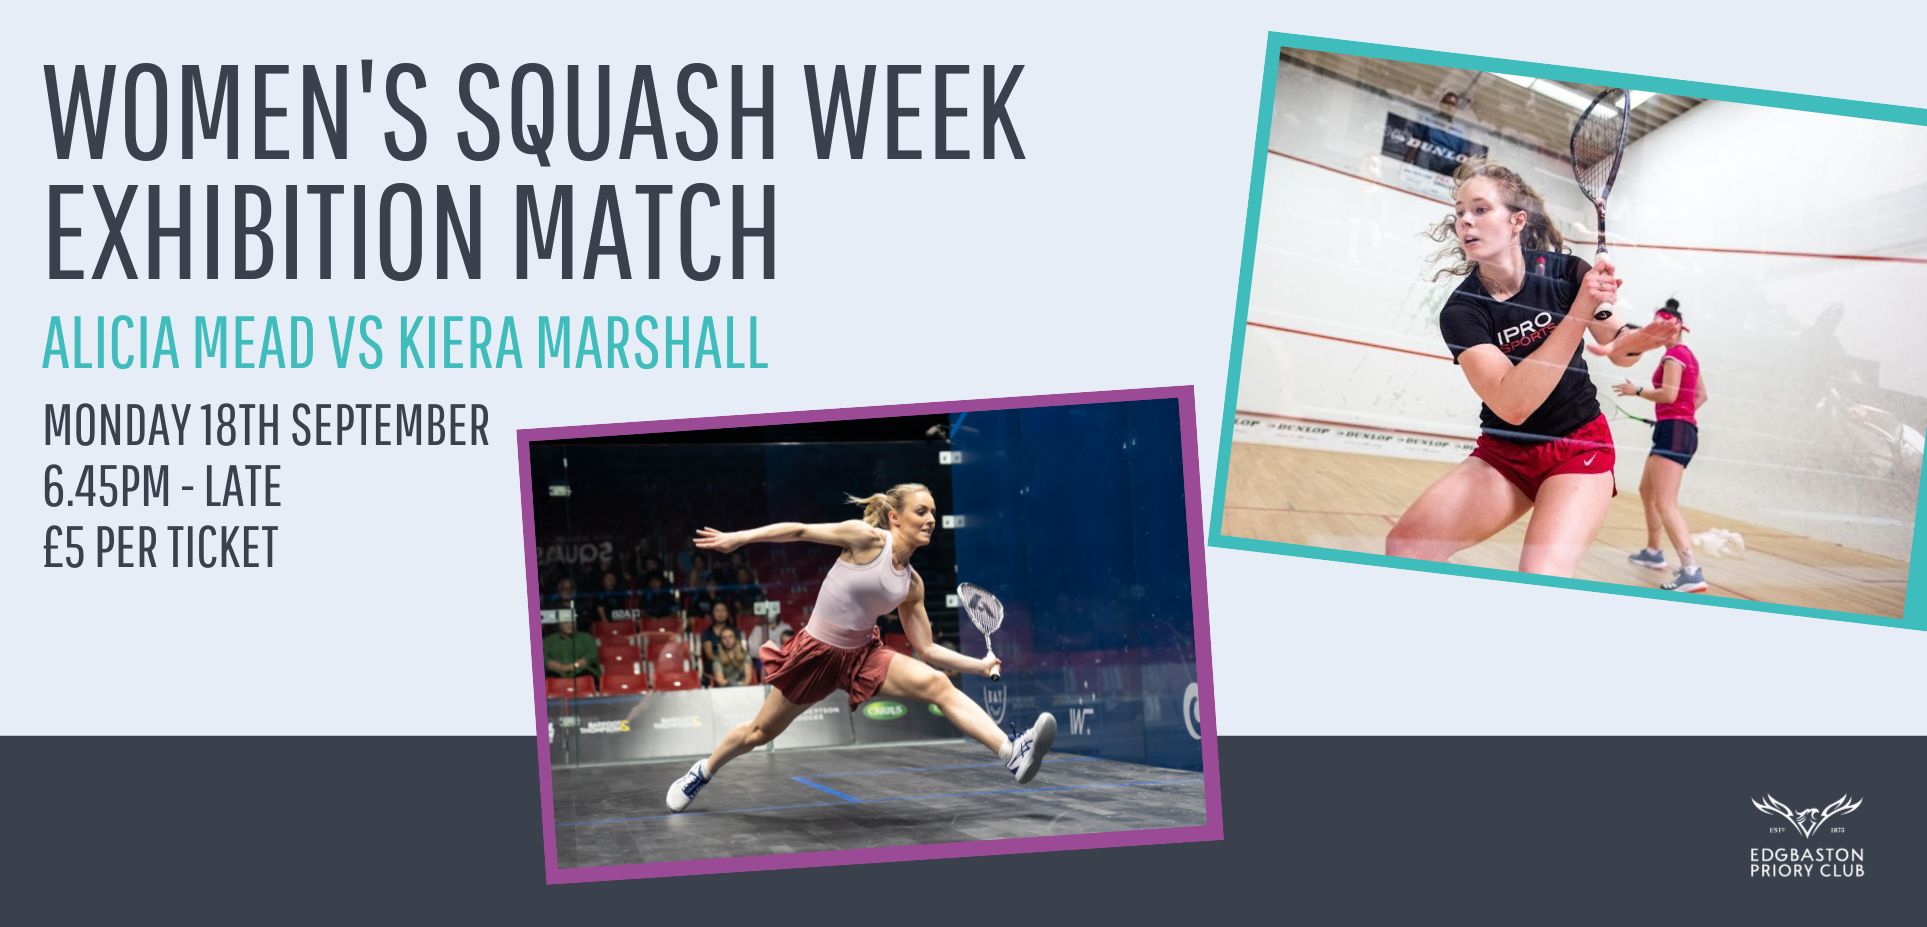 women's squash week exhibition match between Alicia Mead and Kiera Marshall